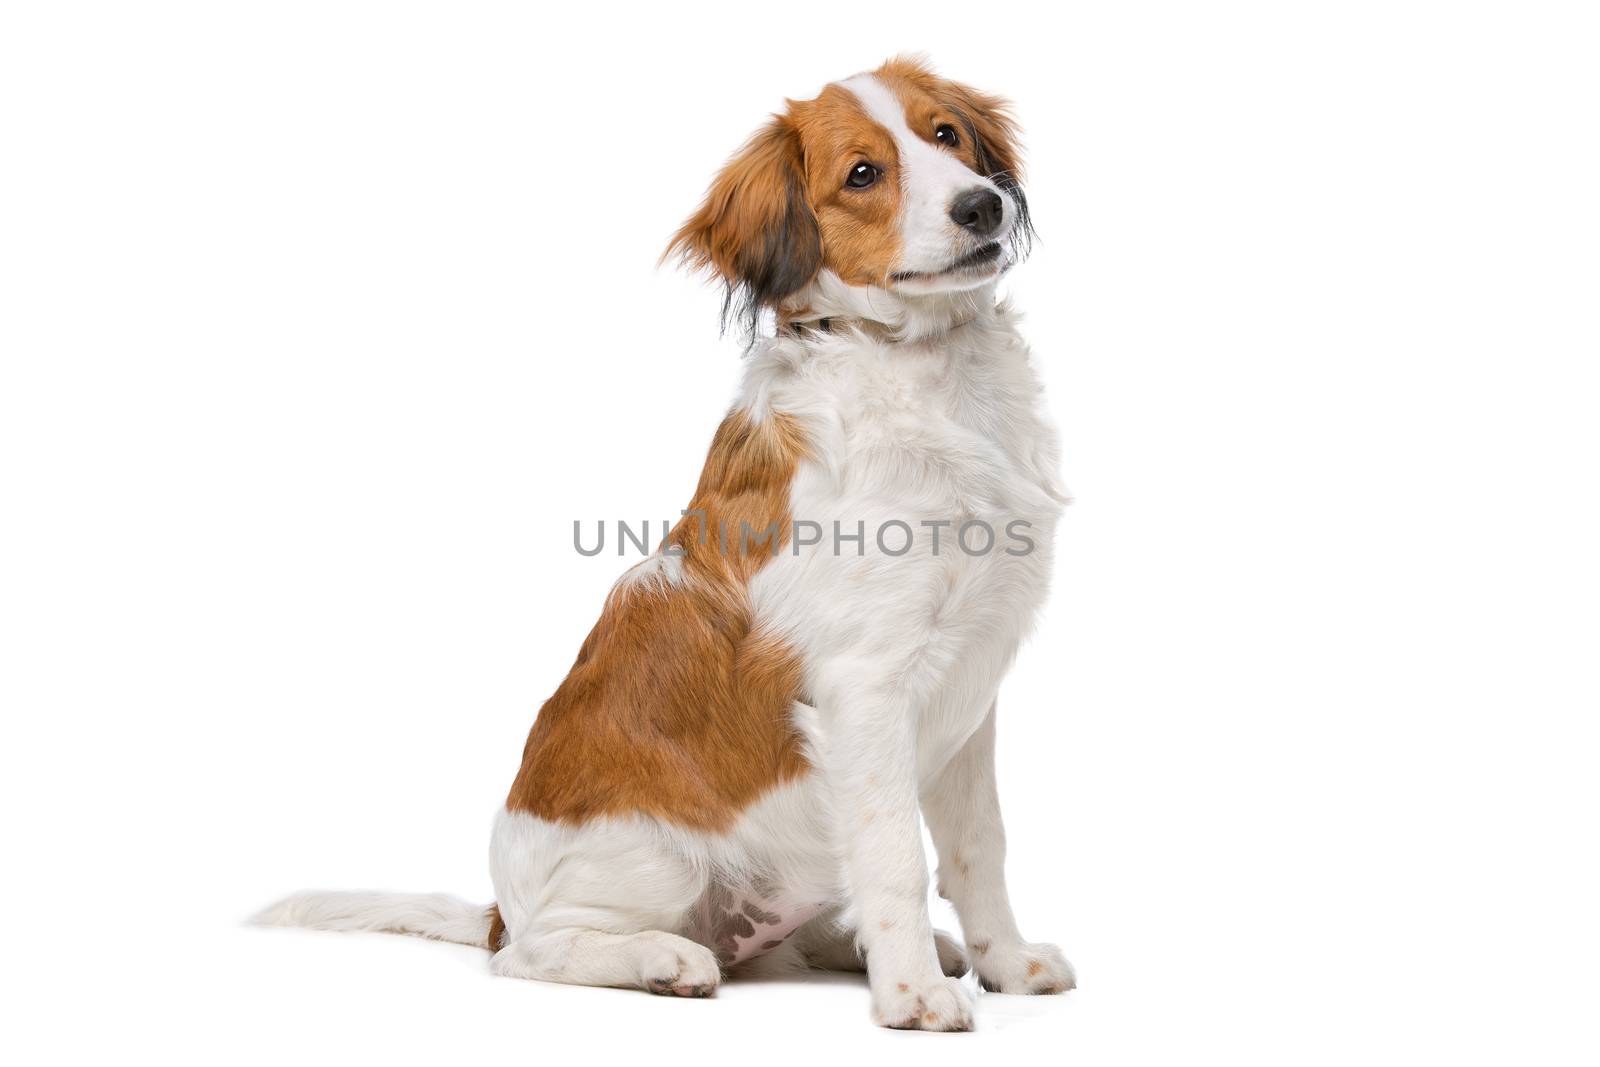 Brown and white Kooiker dog by eriklam